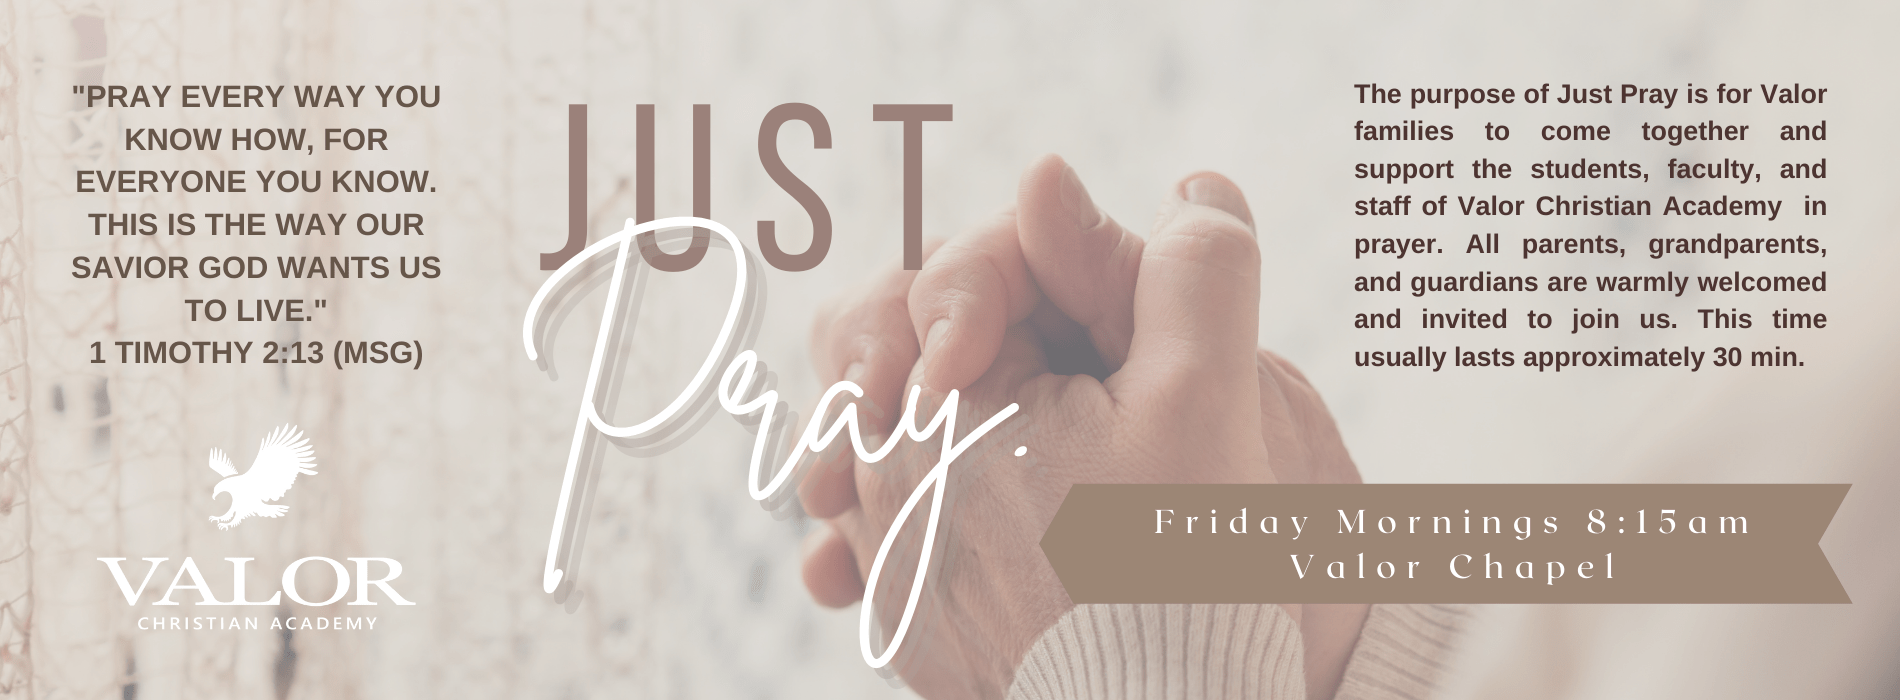 Just Pray meets every Friday to pray for the students families and staff of Valor Christian Academy